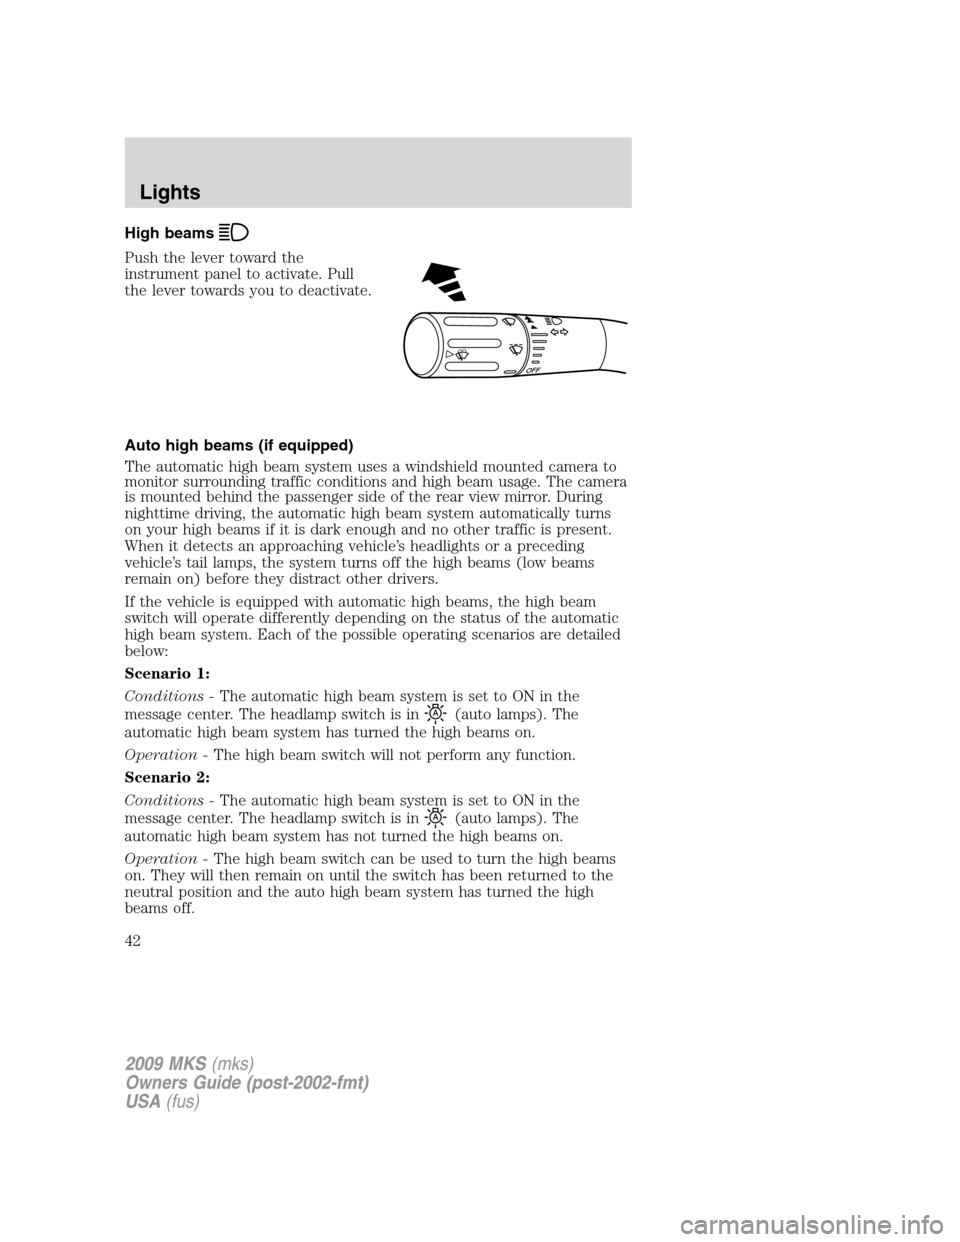 LINCOLN MKS 2009  Owners Manual High beams
Push the lever toward the
instrument panel to activate. Pull
the lever towards you to deactivate.
Auto high beams (if equipped)
The automatic high beam system uses a windshield mounted came